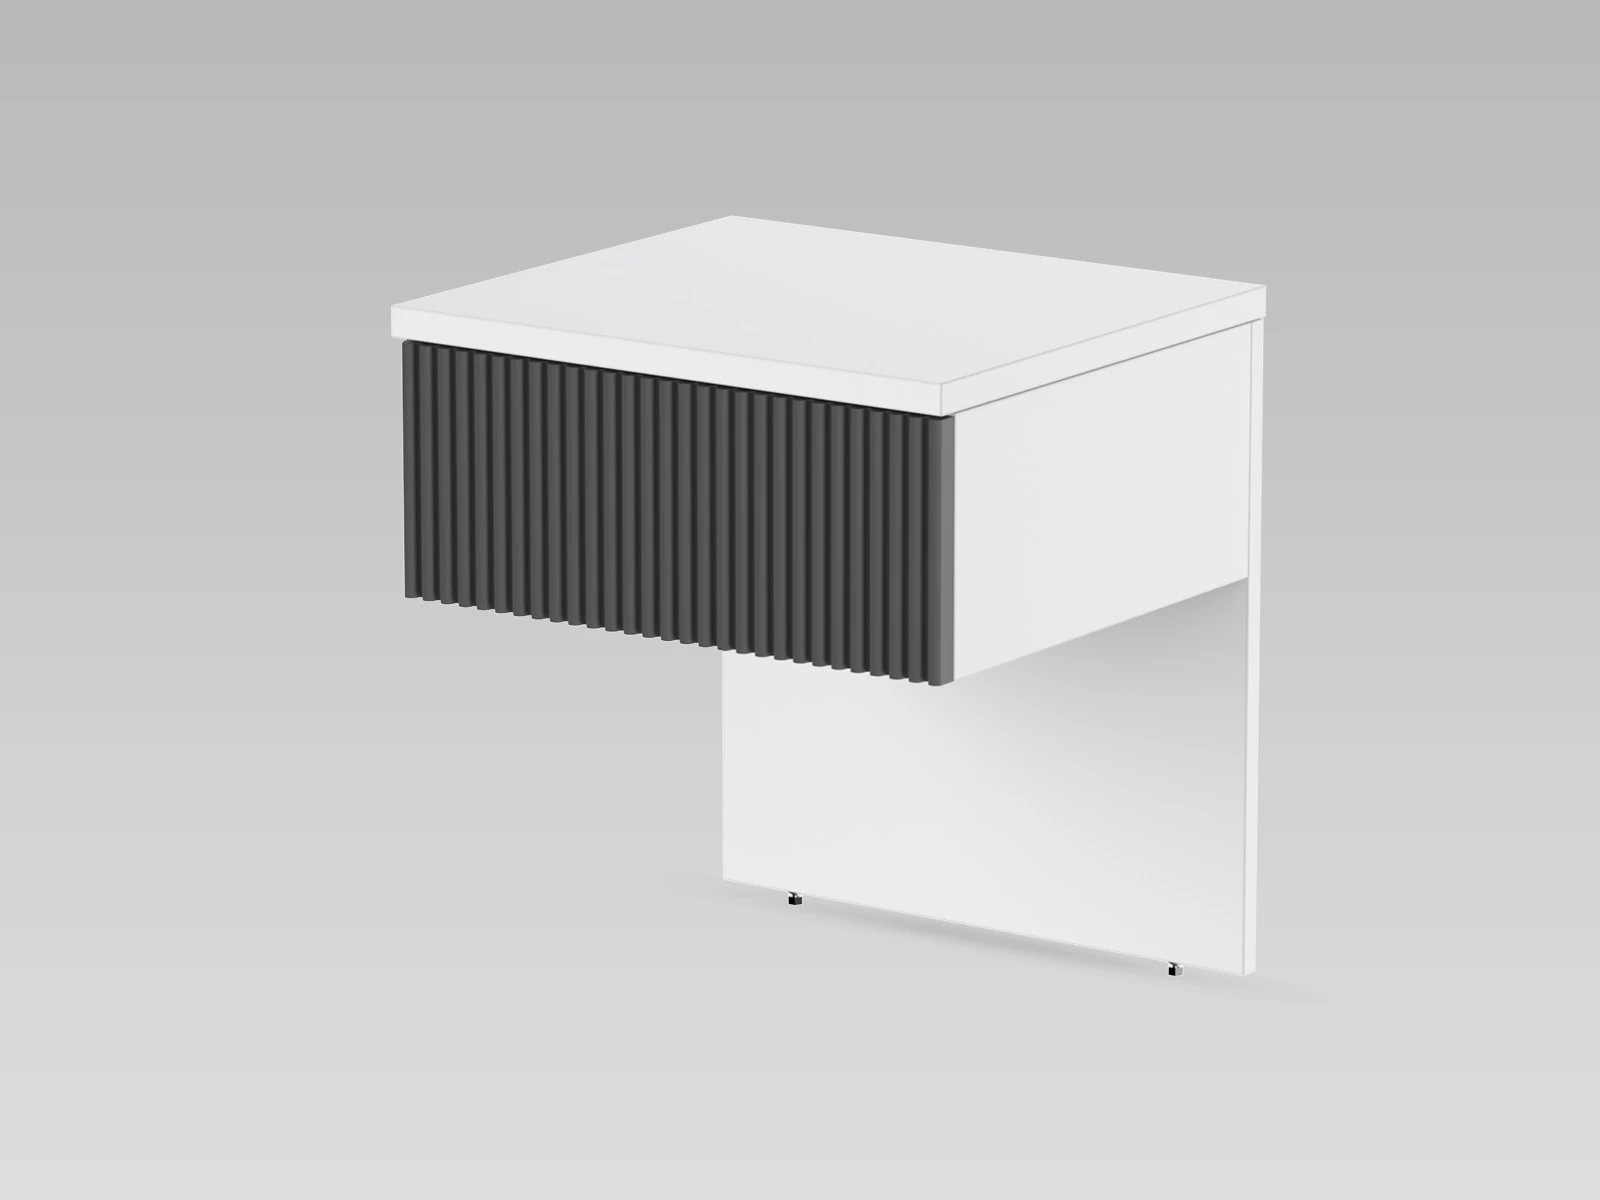 2 Bedside table Classic White / Anthracite Waves